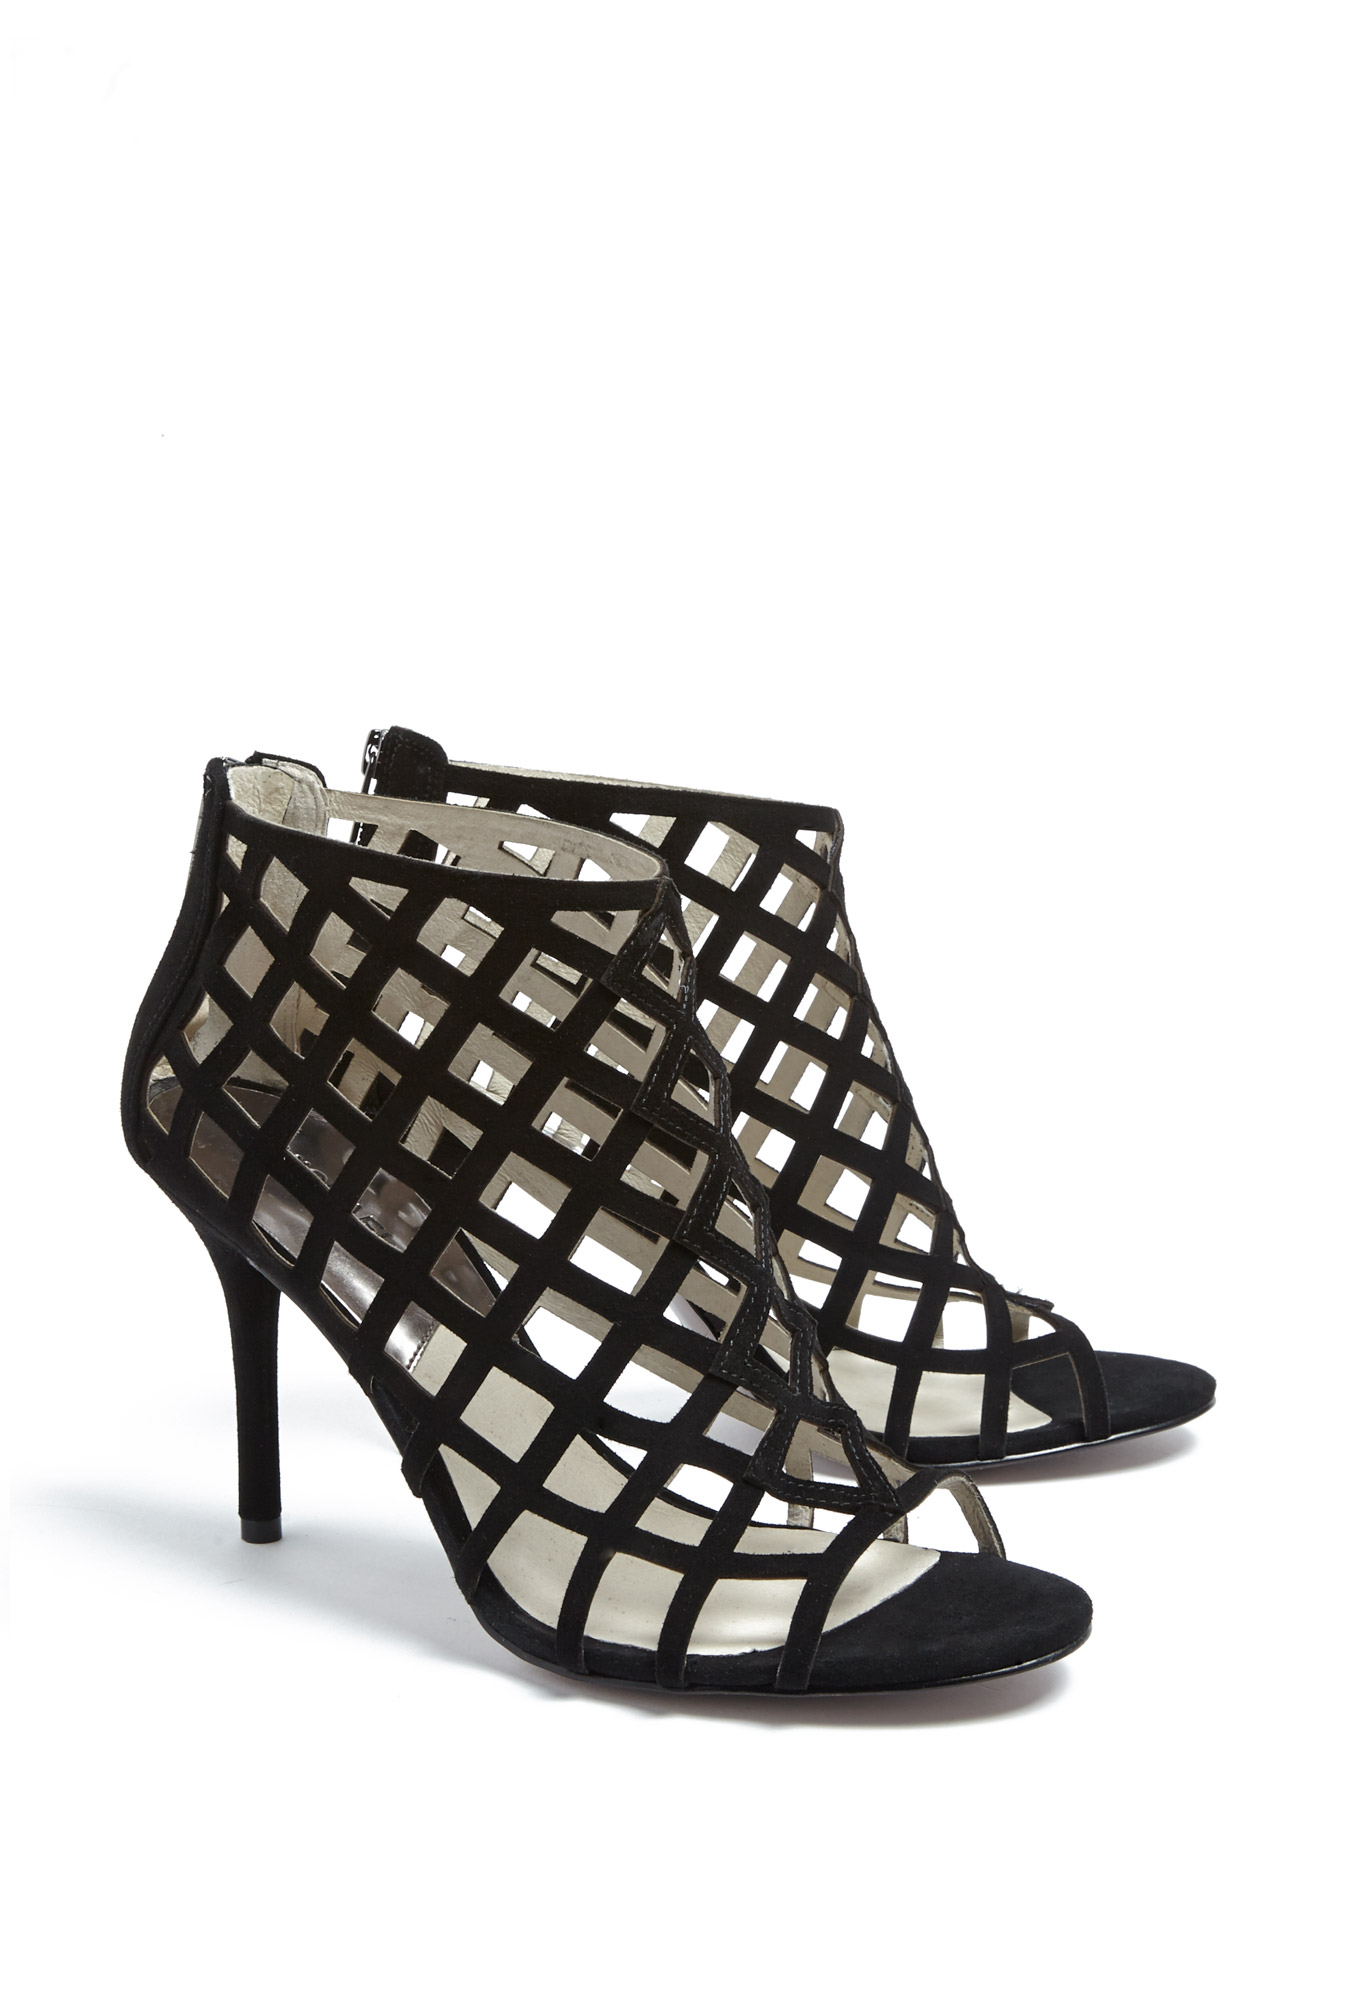 Michael Michael Kors Yvonne Studded Ankle Bootie in Black